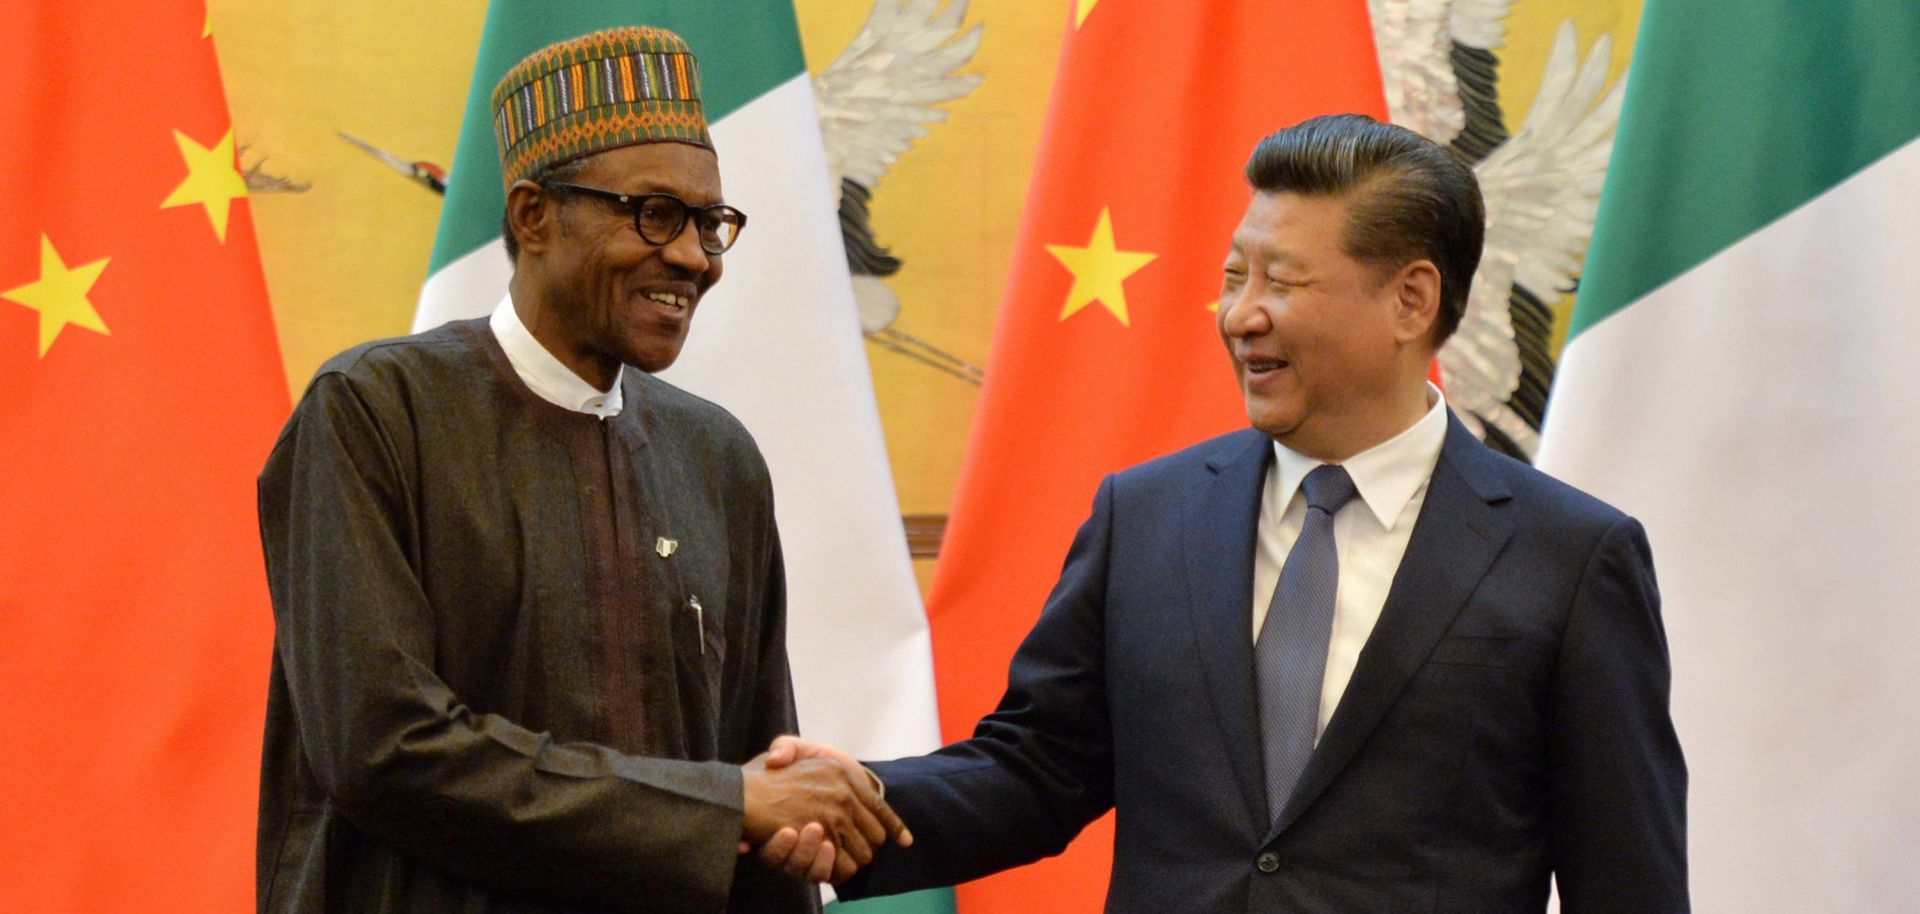 Nigerian President Muhammadu Buhari (L) shakes hands with his Chinese counterpart, Xi Jinping, in Beijing.